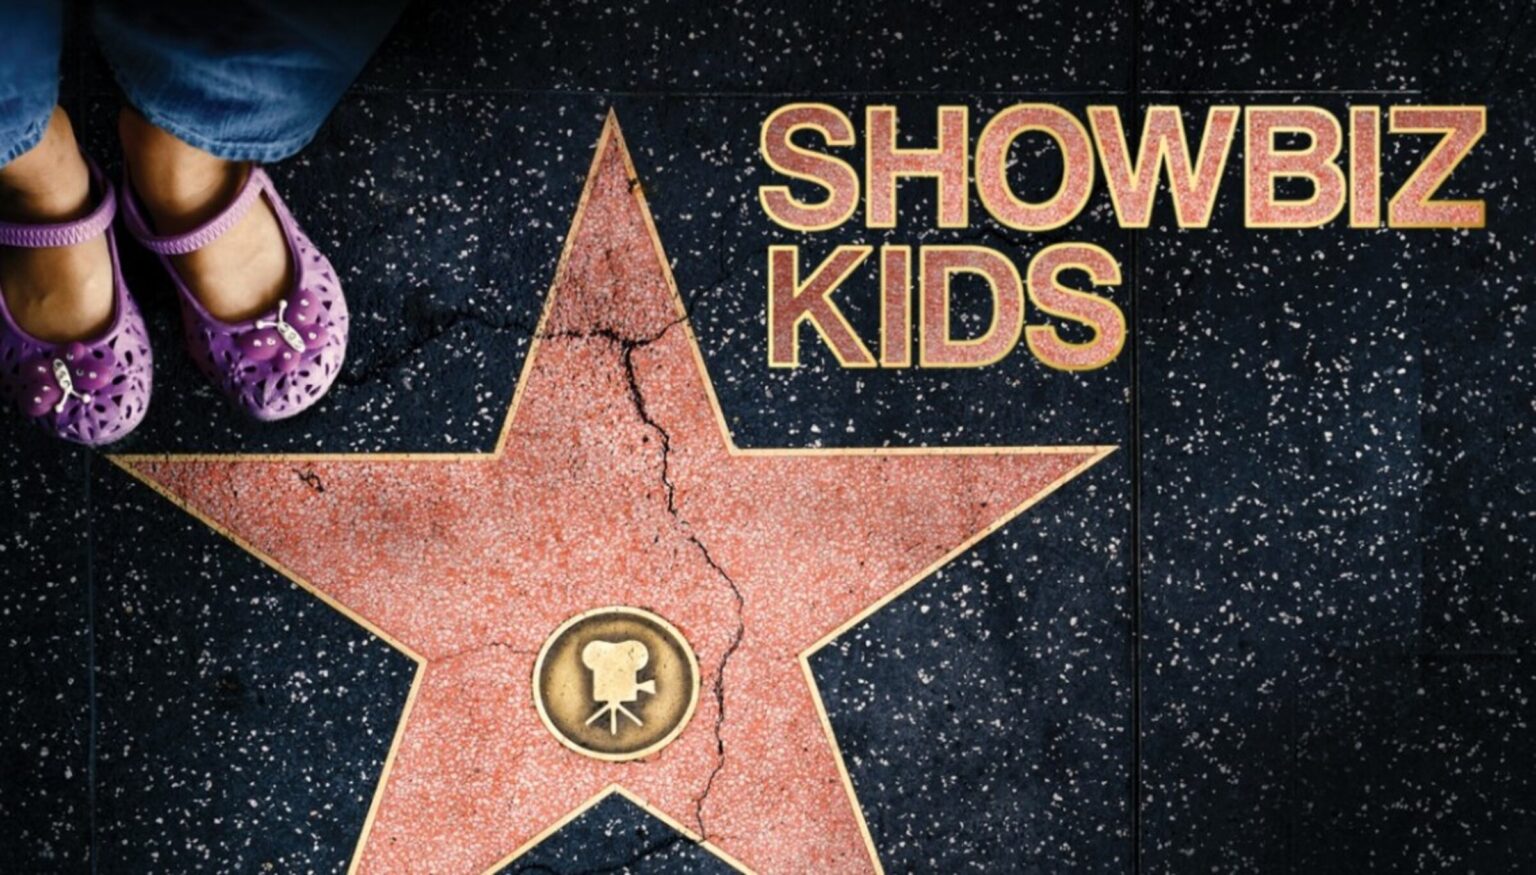 HBO recently premiered 'Showbiz Kids', a documentary directed by Alex Winter uncovering sexual abuse in Hollywood. Here's what we know.